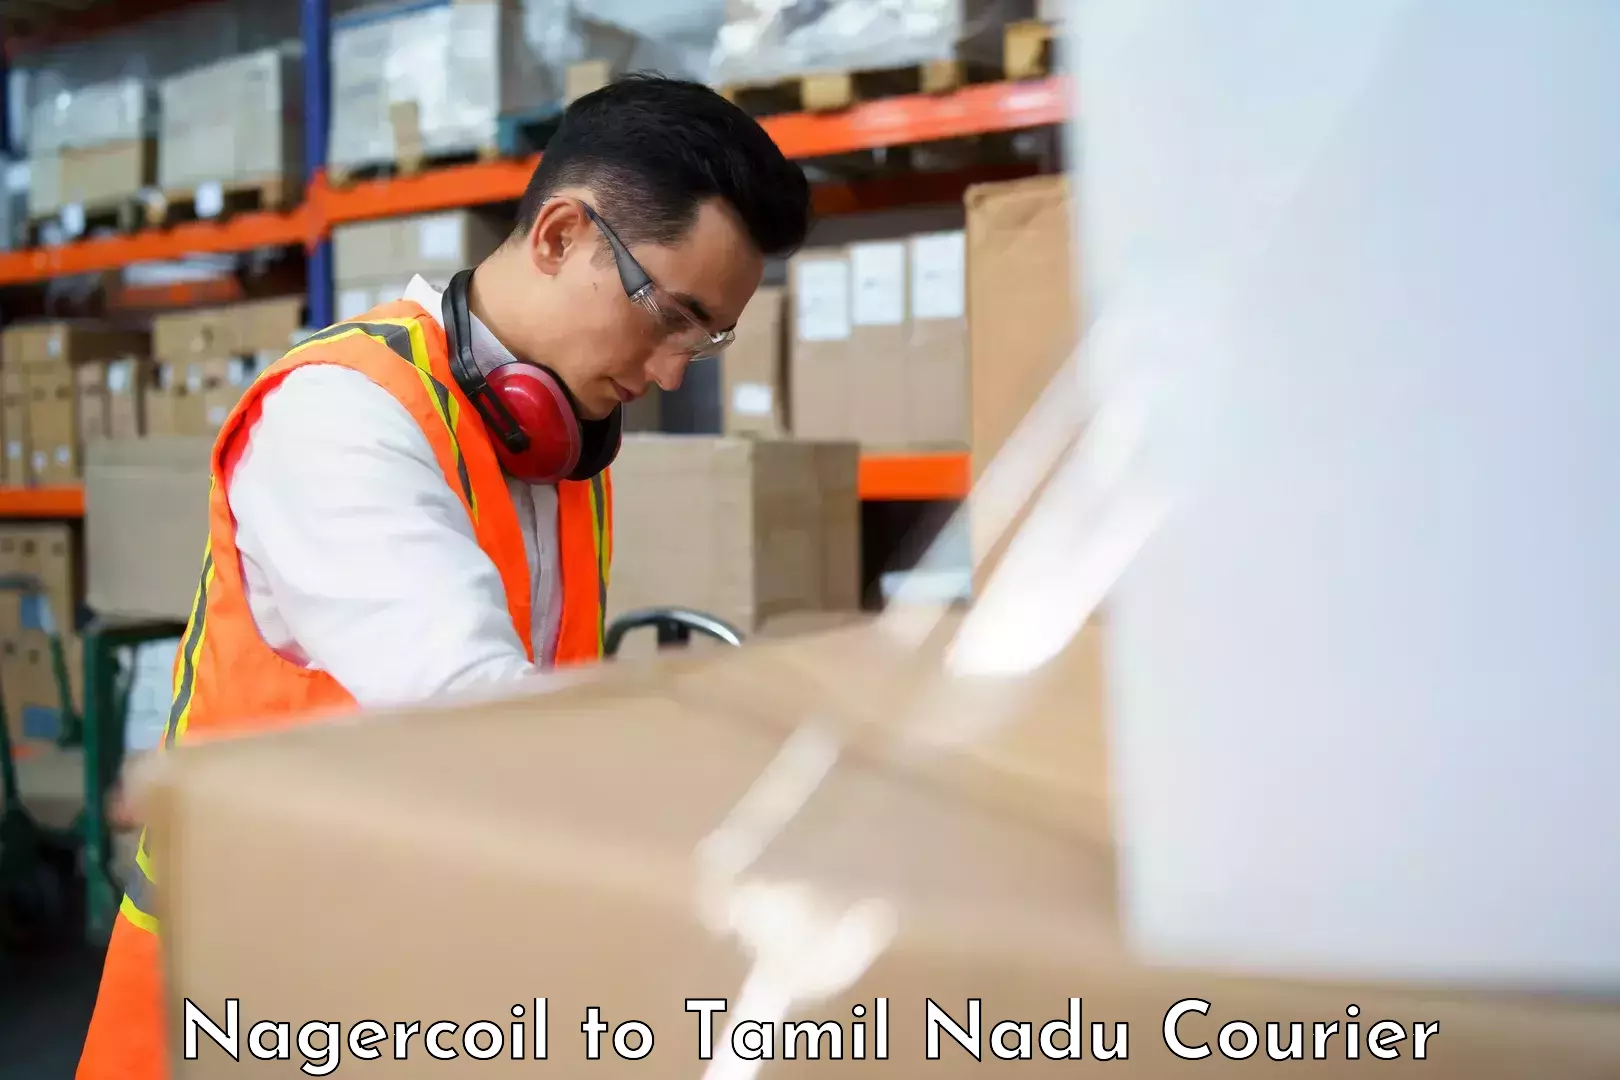 Professional packing services Nagercoil to Chennai Port